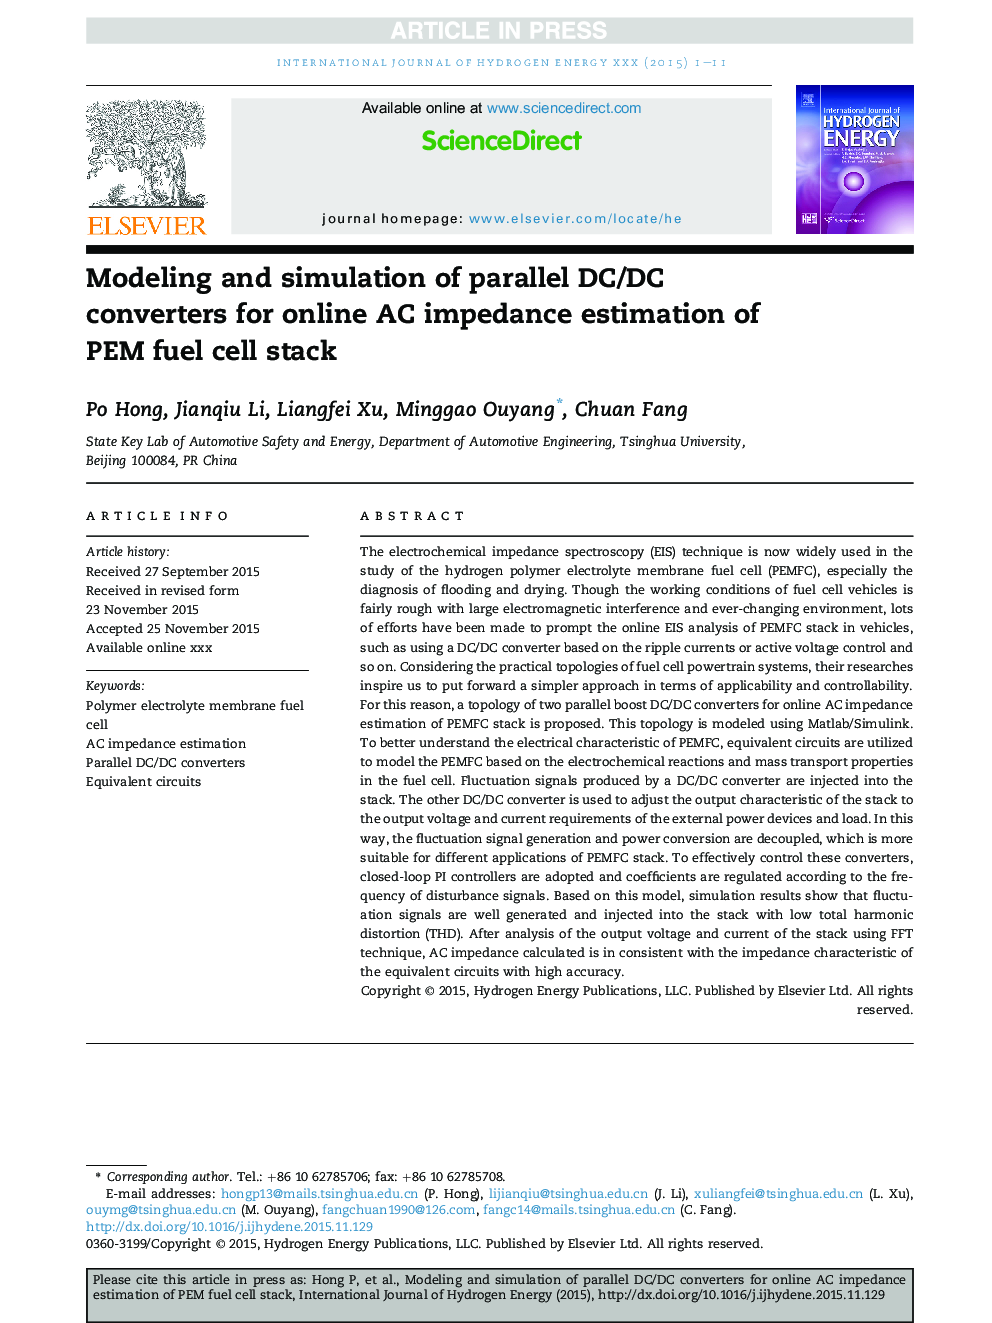 Modeling and simulation of parallel DC/DC converters for online AC impedance estimation of PEM fuel cell stack